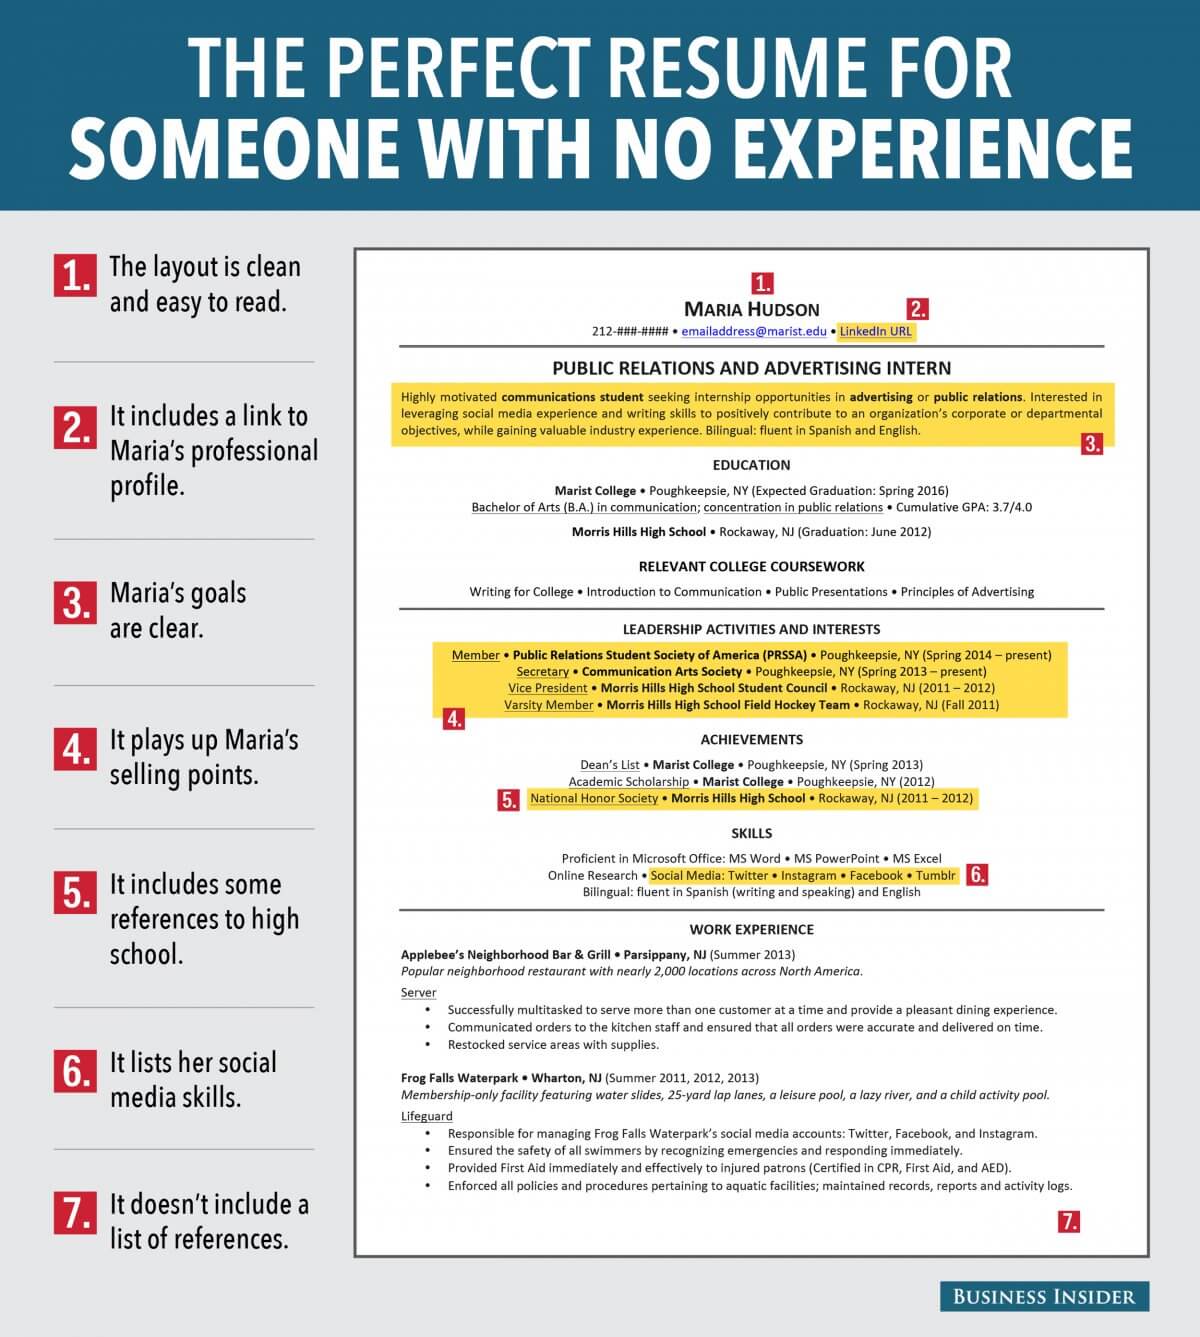 How to Write a Resume with No Experience - Jobscan